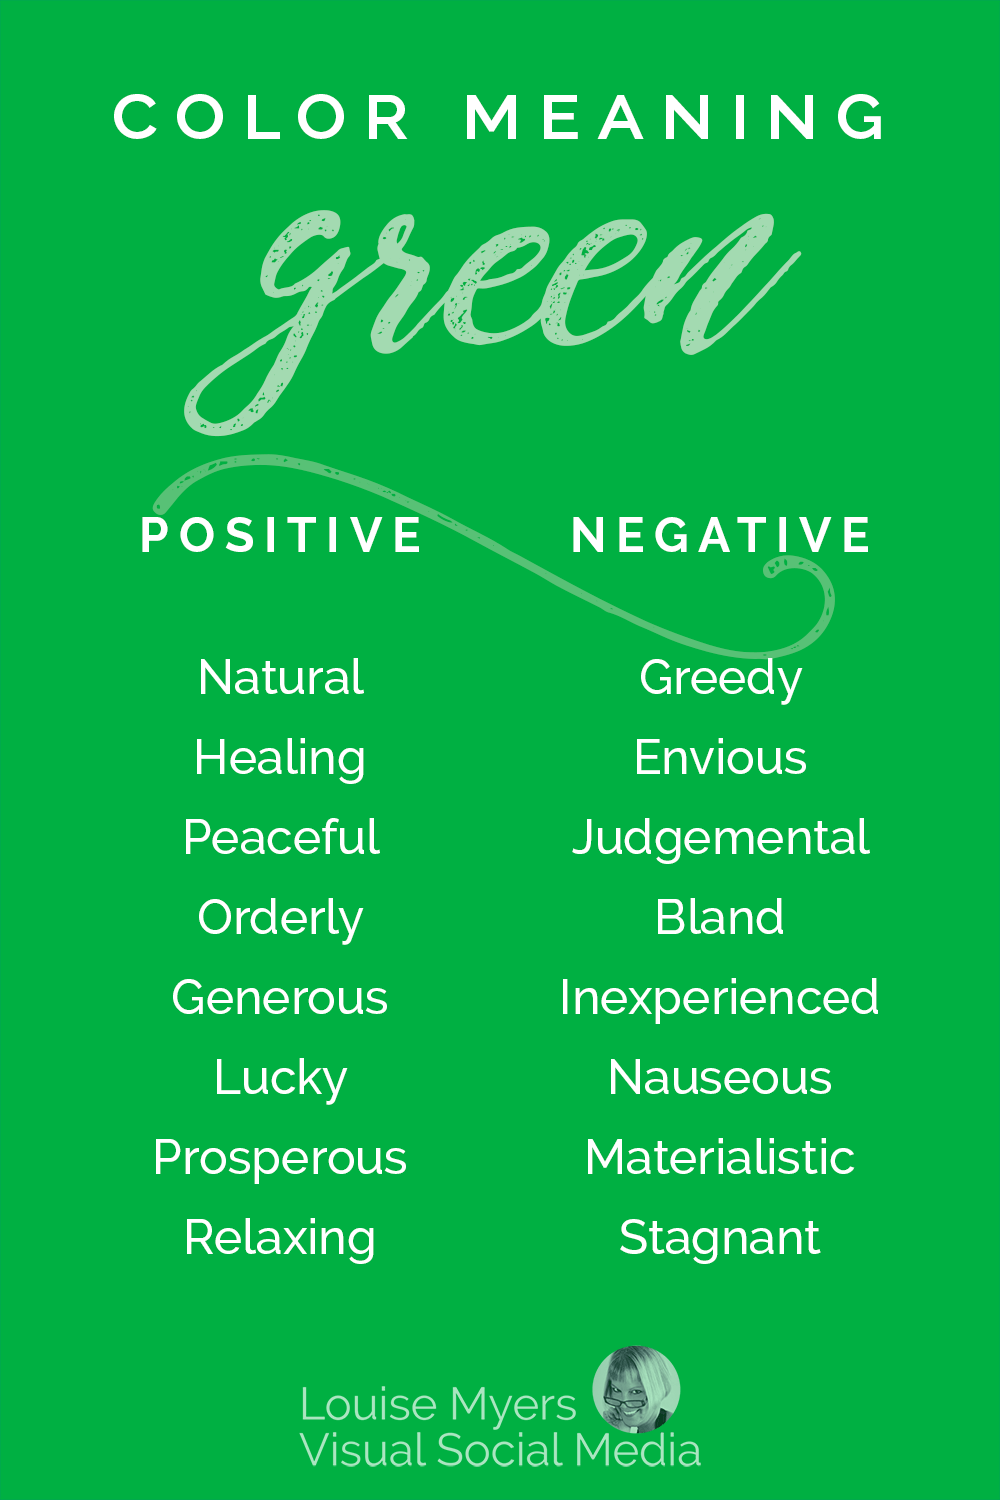 green graphic lists its color meanings both positive and negative.